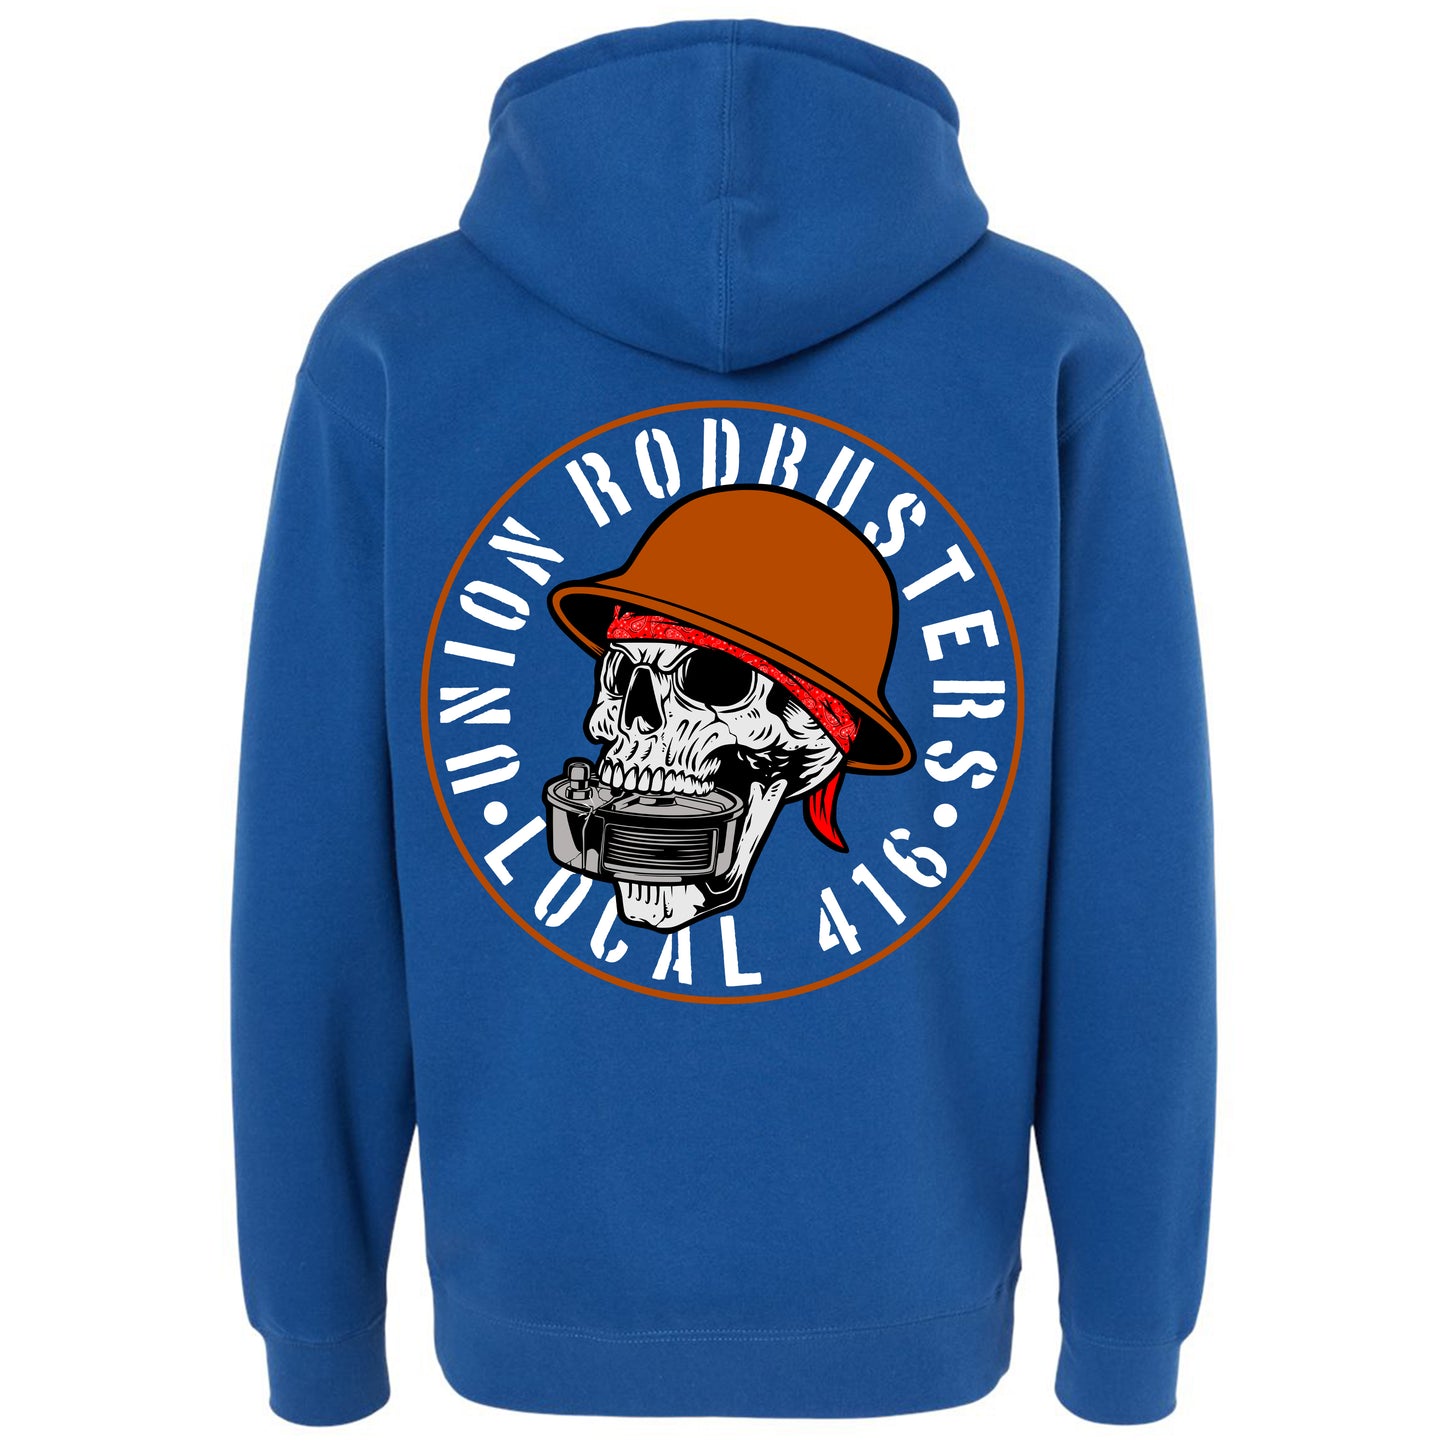 Copy of WIRE SKULL PULLOVER HOODIE LOCAL 416